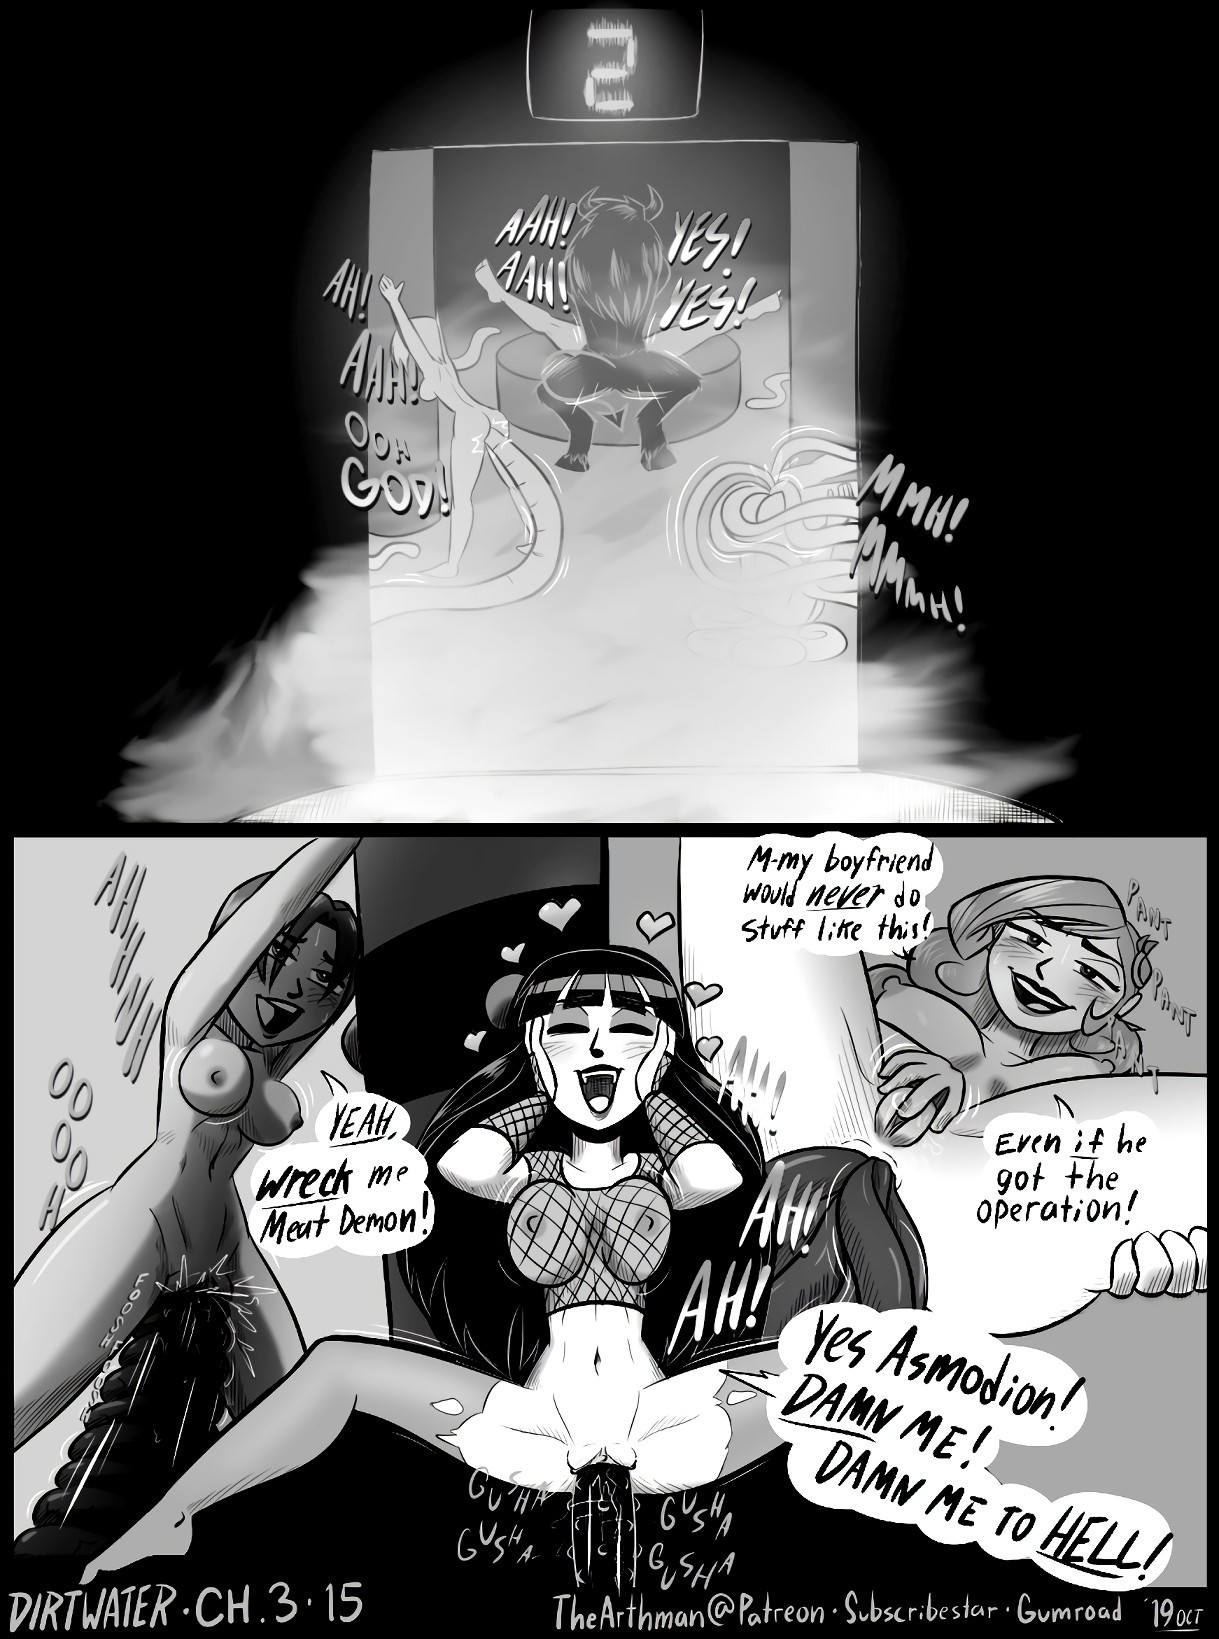 Dirtwater 3 - Dark Chambers porn comic picture 16